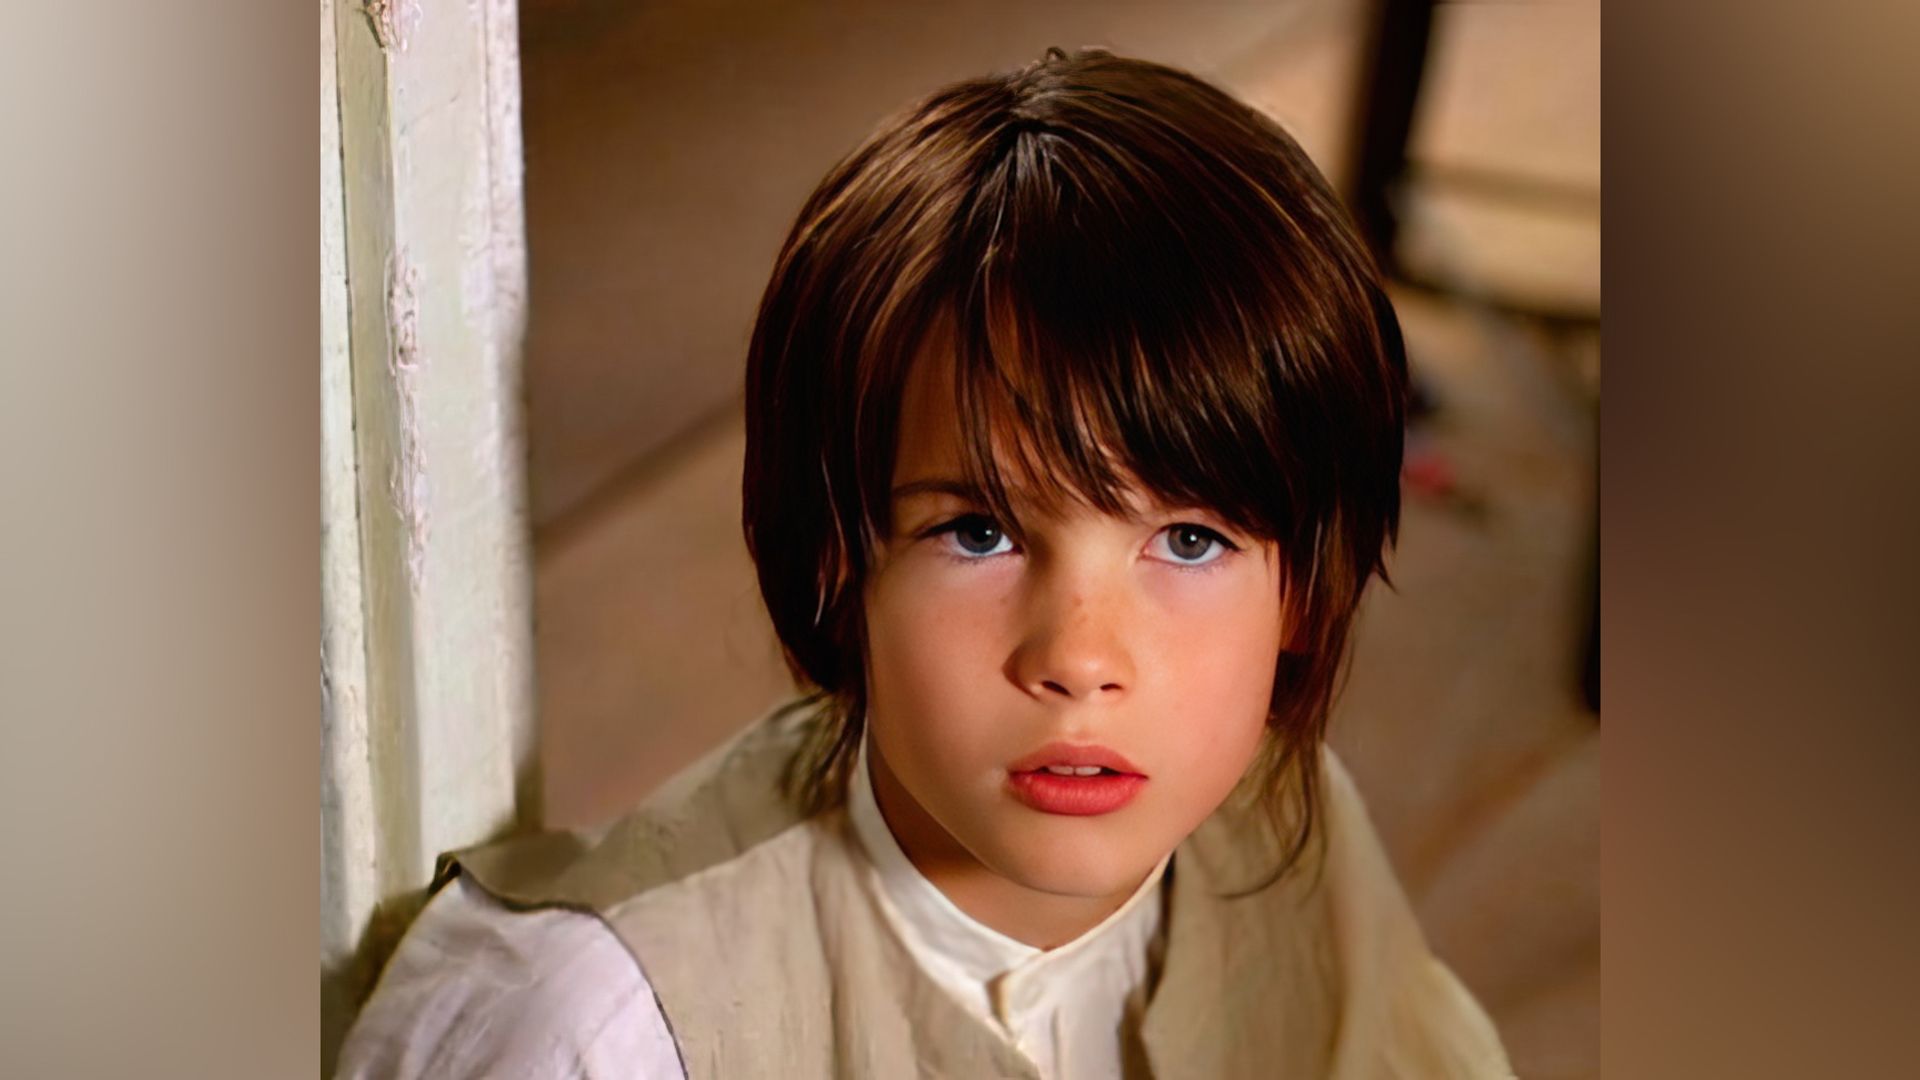 Tom Sturridge as a child in the movie 'Gulliver's Travels'